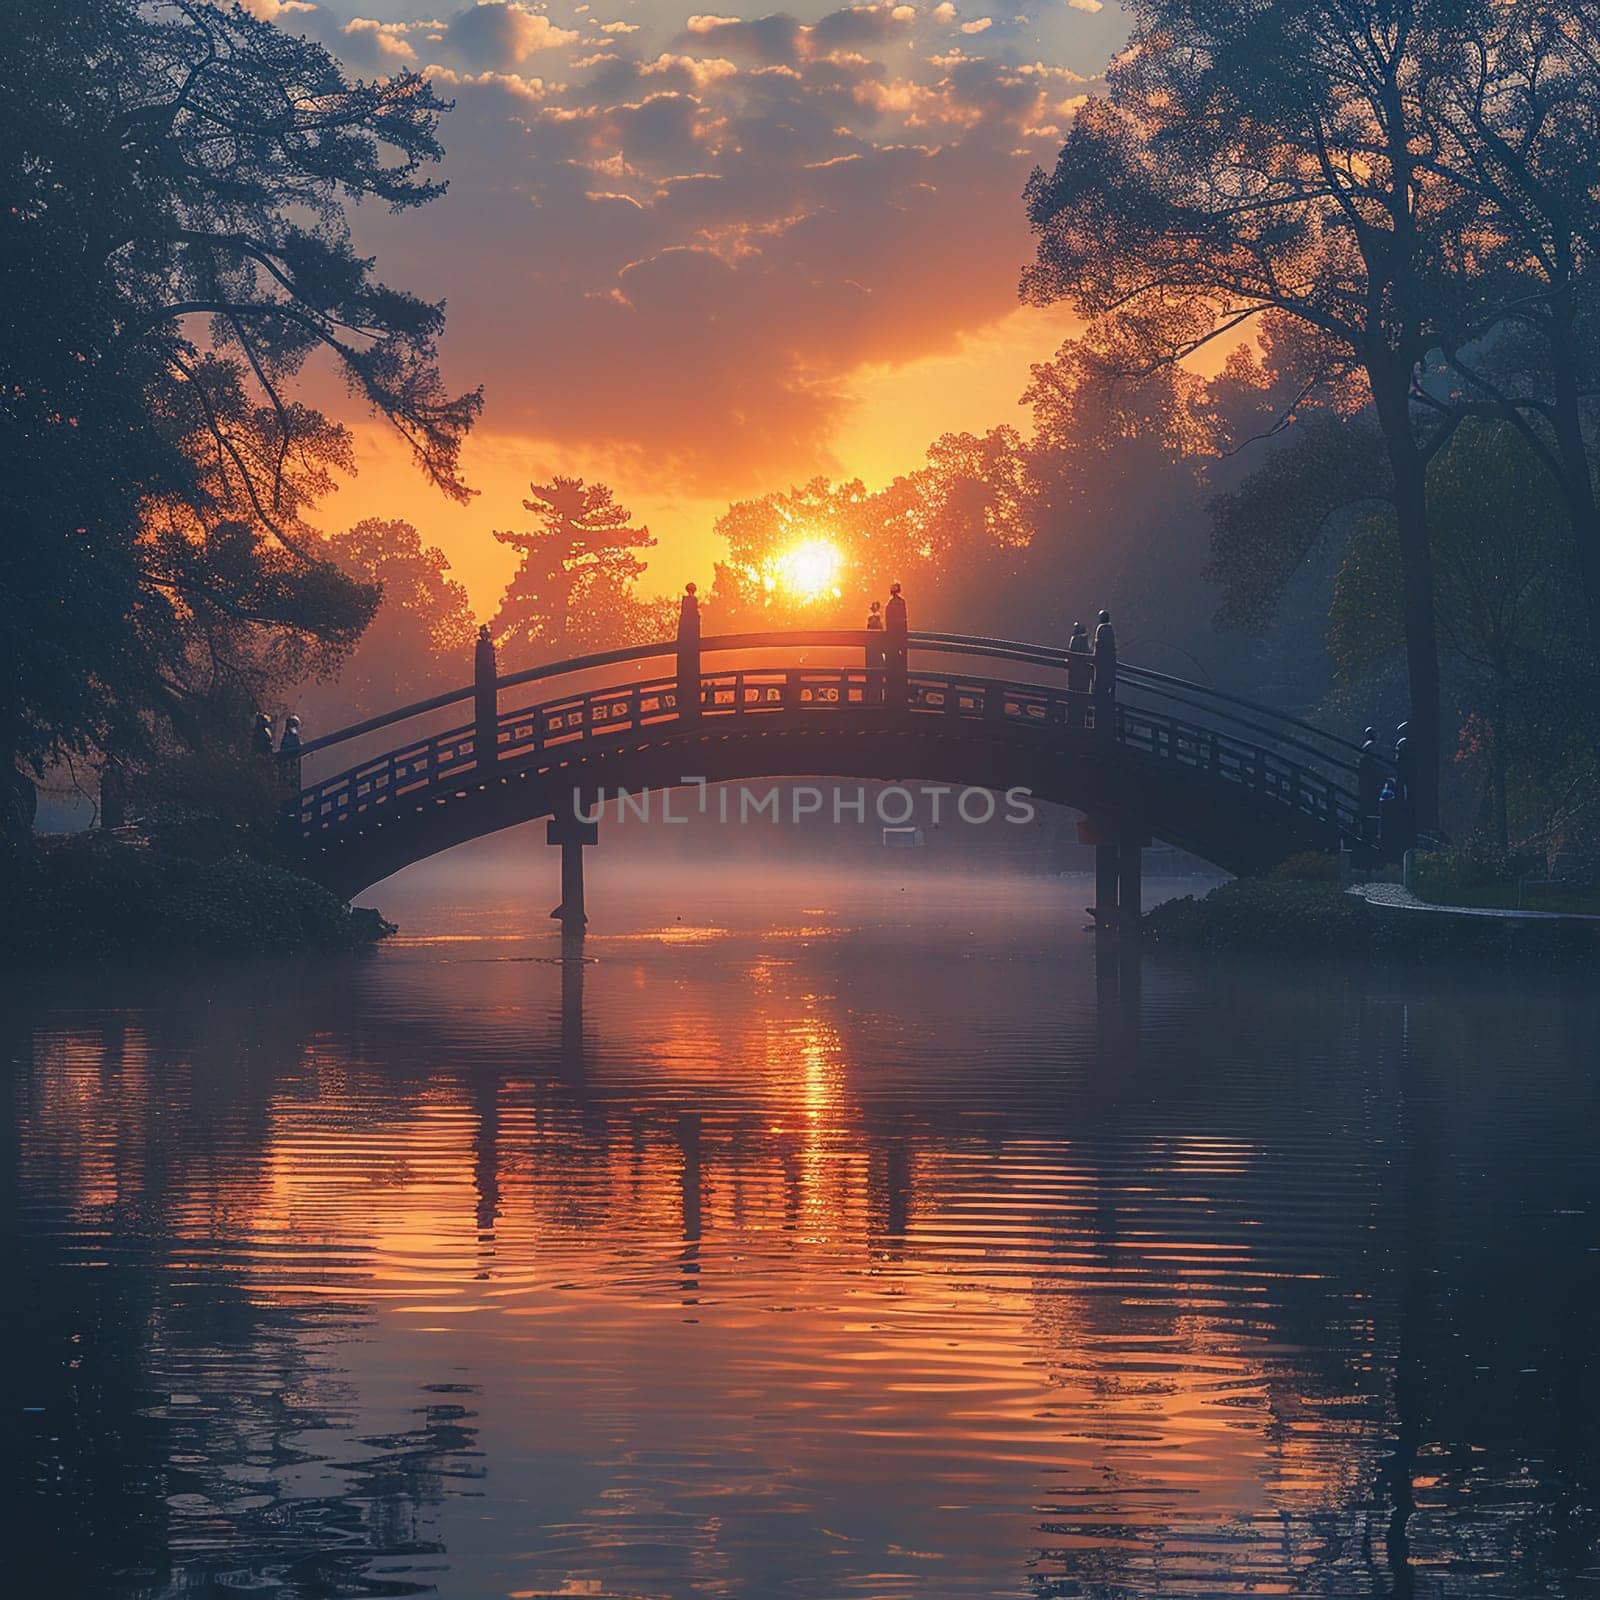 A bridge spanning a tranquil river at sunrise, connecting two shores and symbolizing passage.